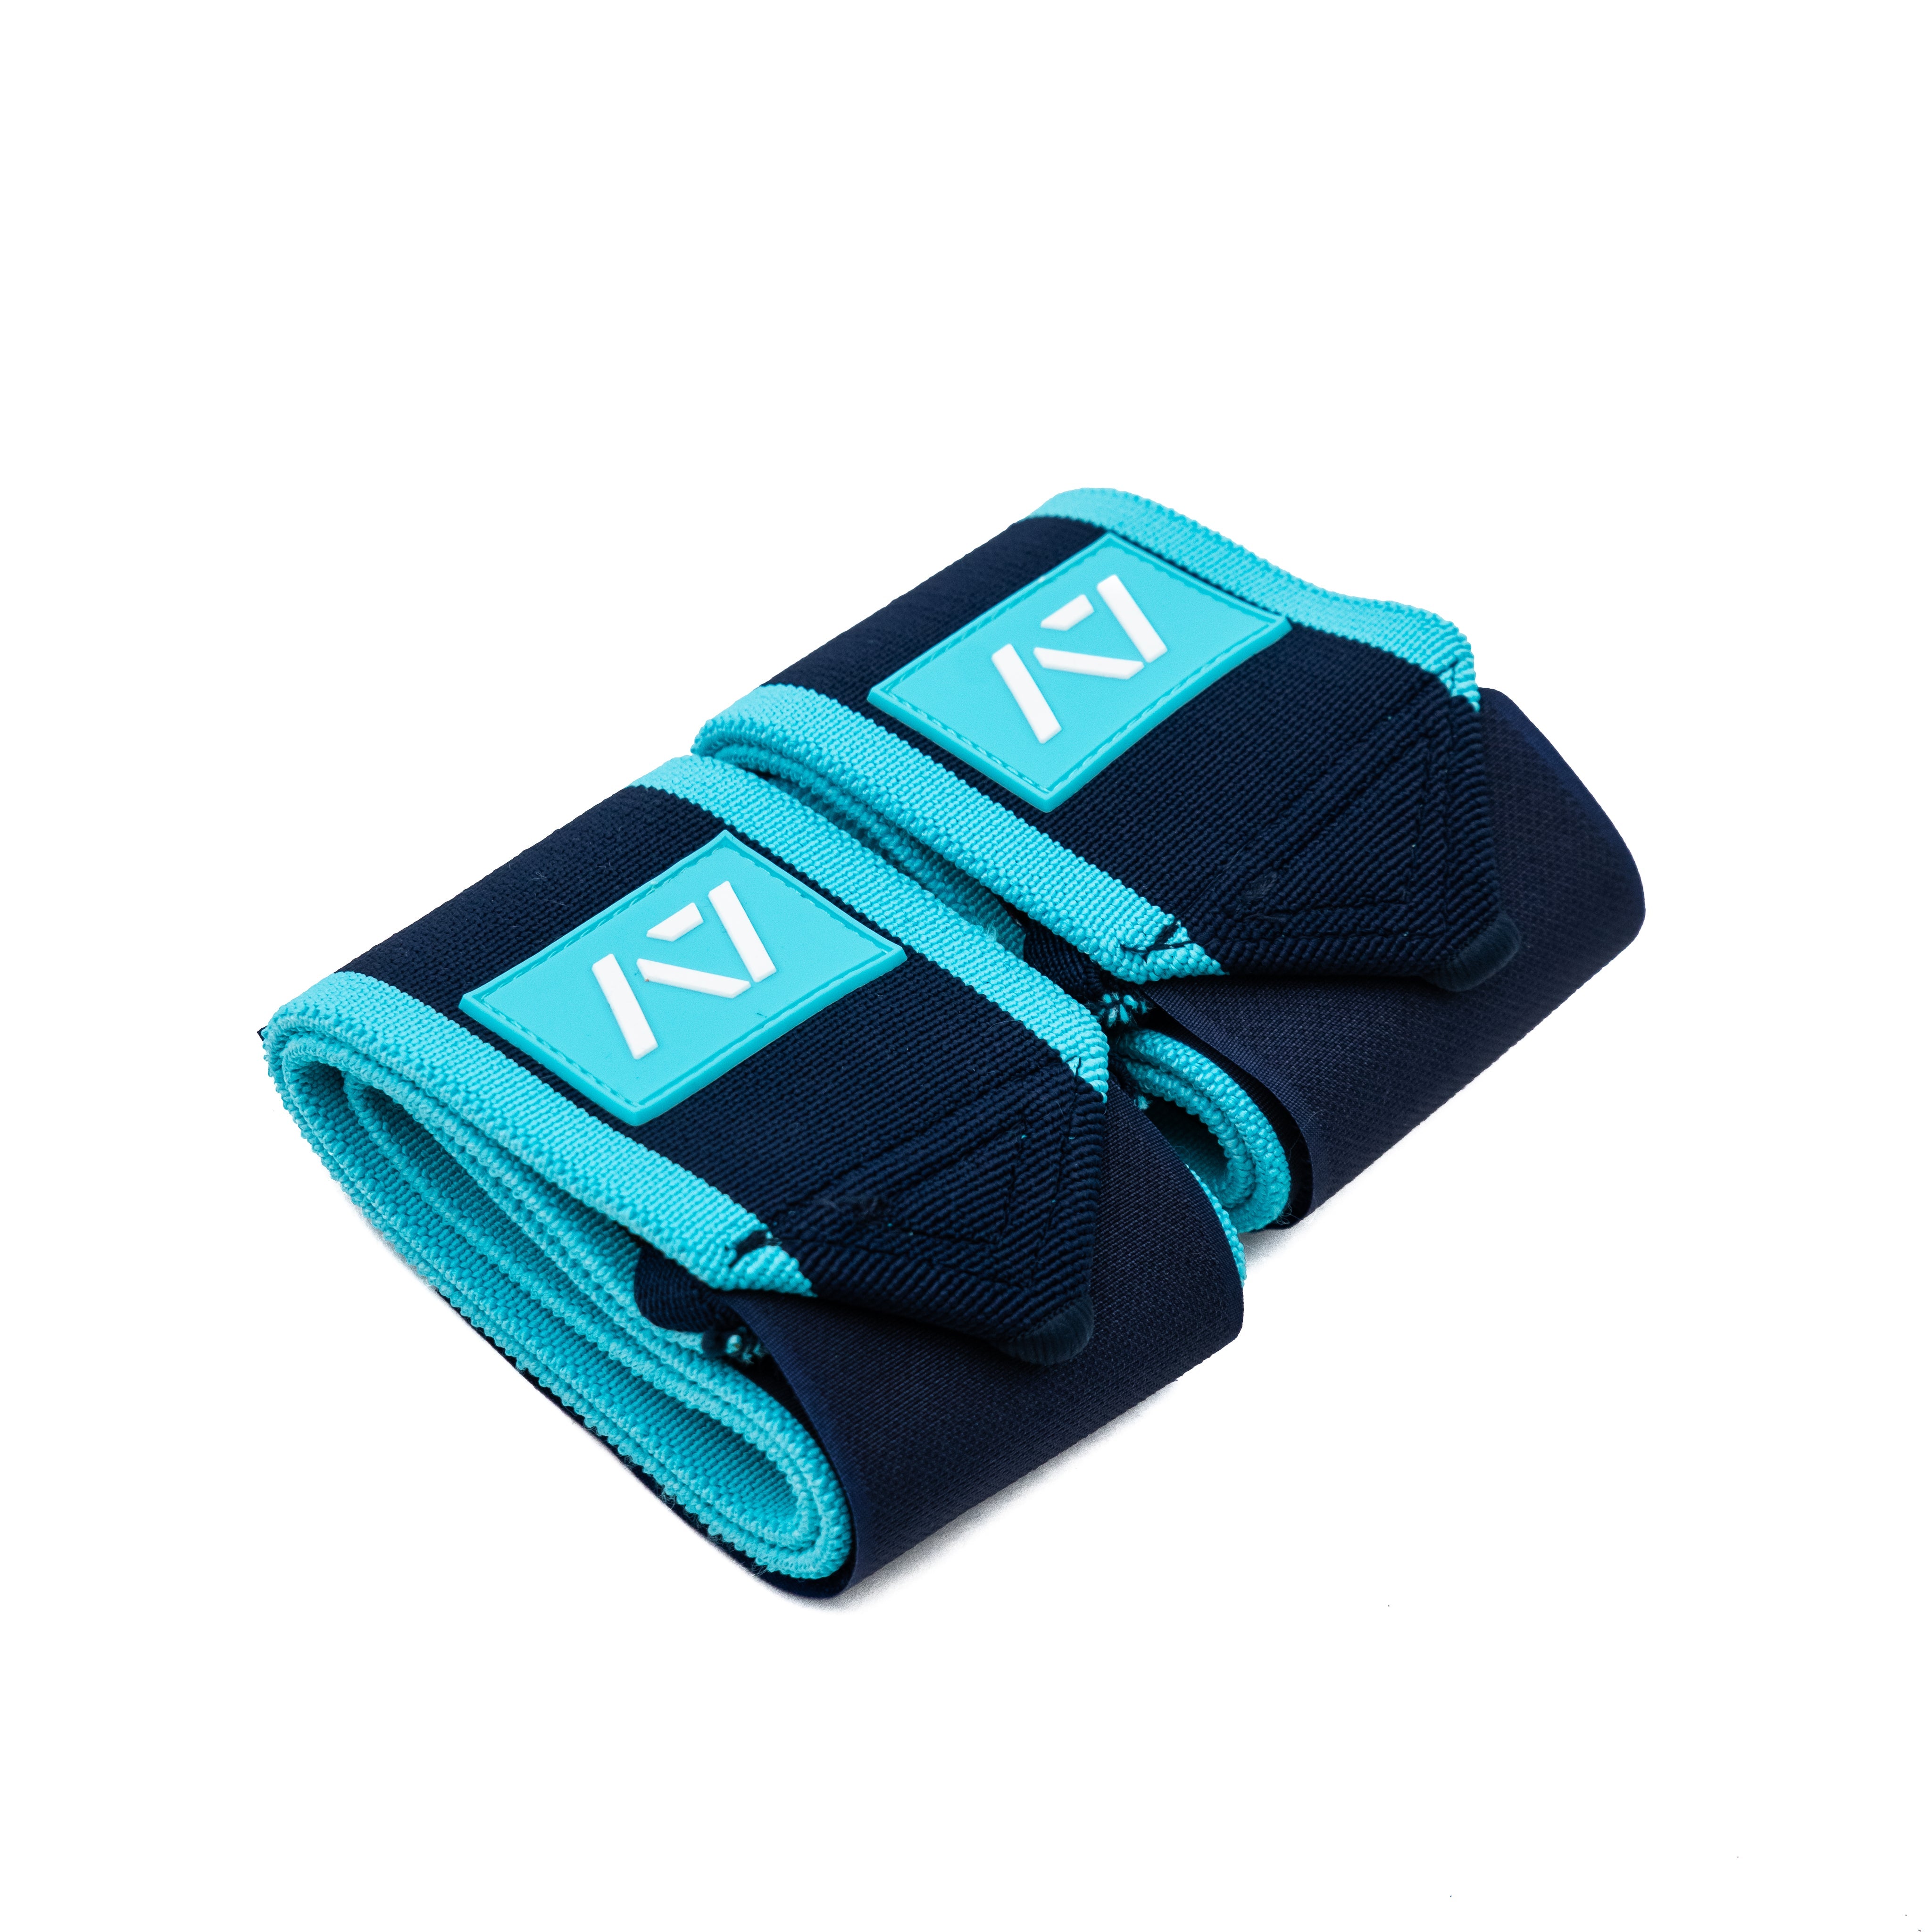 This Iced colourway is a reflection of the sea and a way to cool off from the summer heat. A colourway that stands out on the platform, while still providing the level of quality, support and comfort you demand from your products. These wrist wraps are a perfect addition to your IPF approved kit.